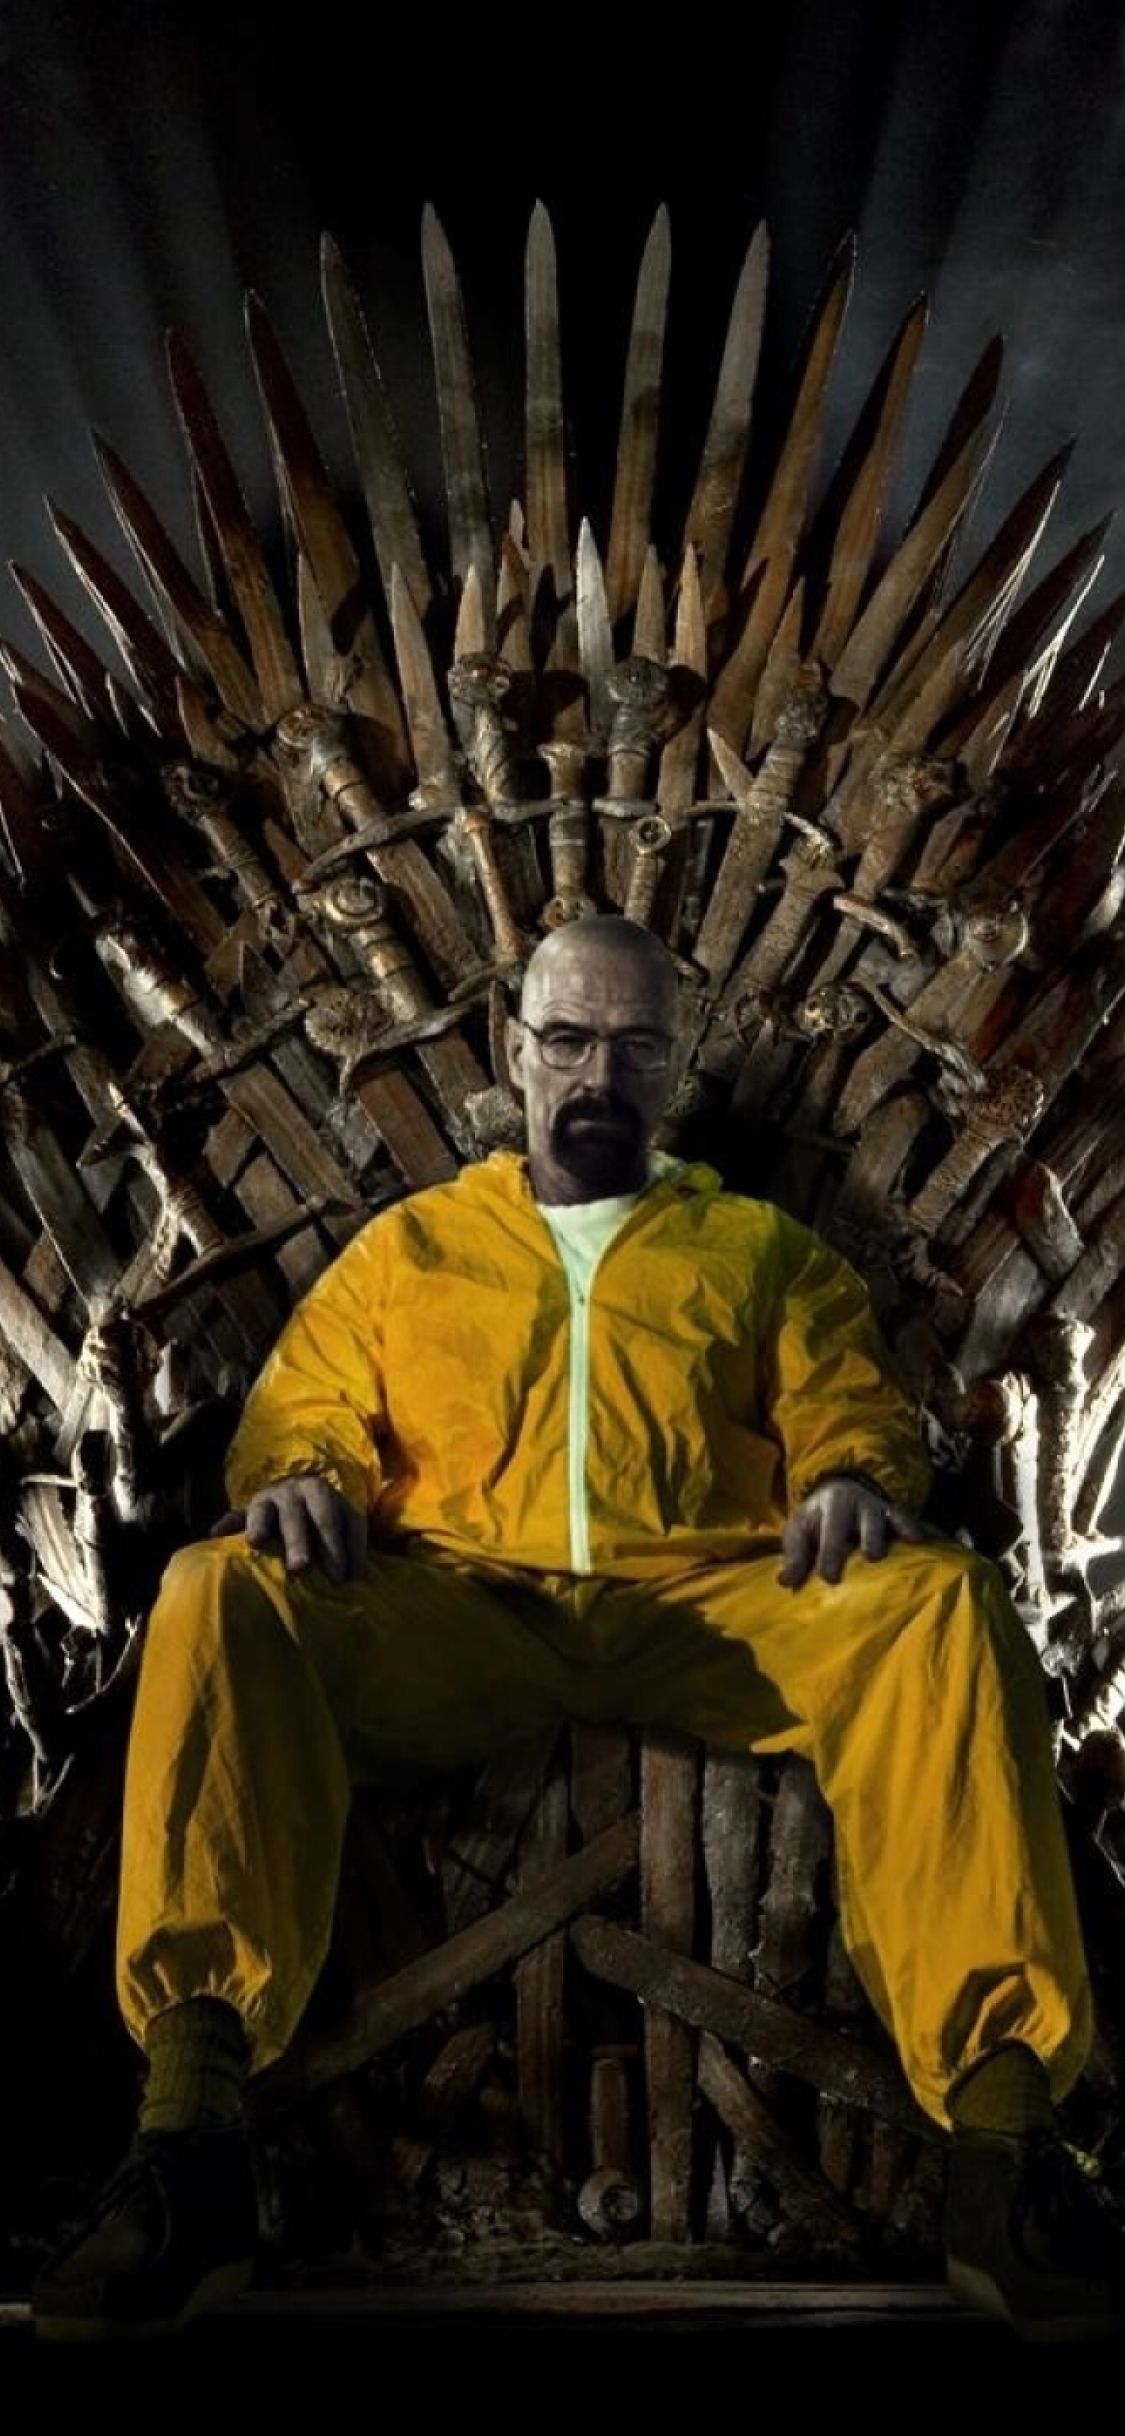 Breaking Bad Game Of Thrones Wallpaper iPhone XS, iPhone iPhone X Wallpaper, HD Movies 4K Wallpaper, Image, Photo and Background